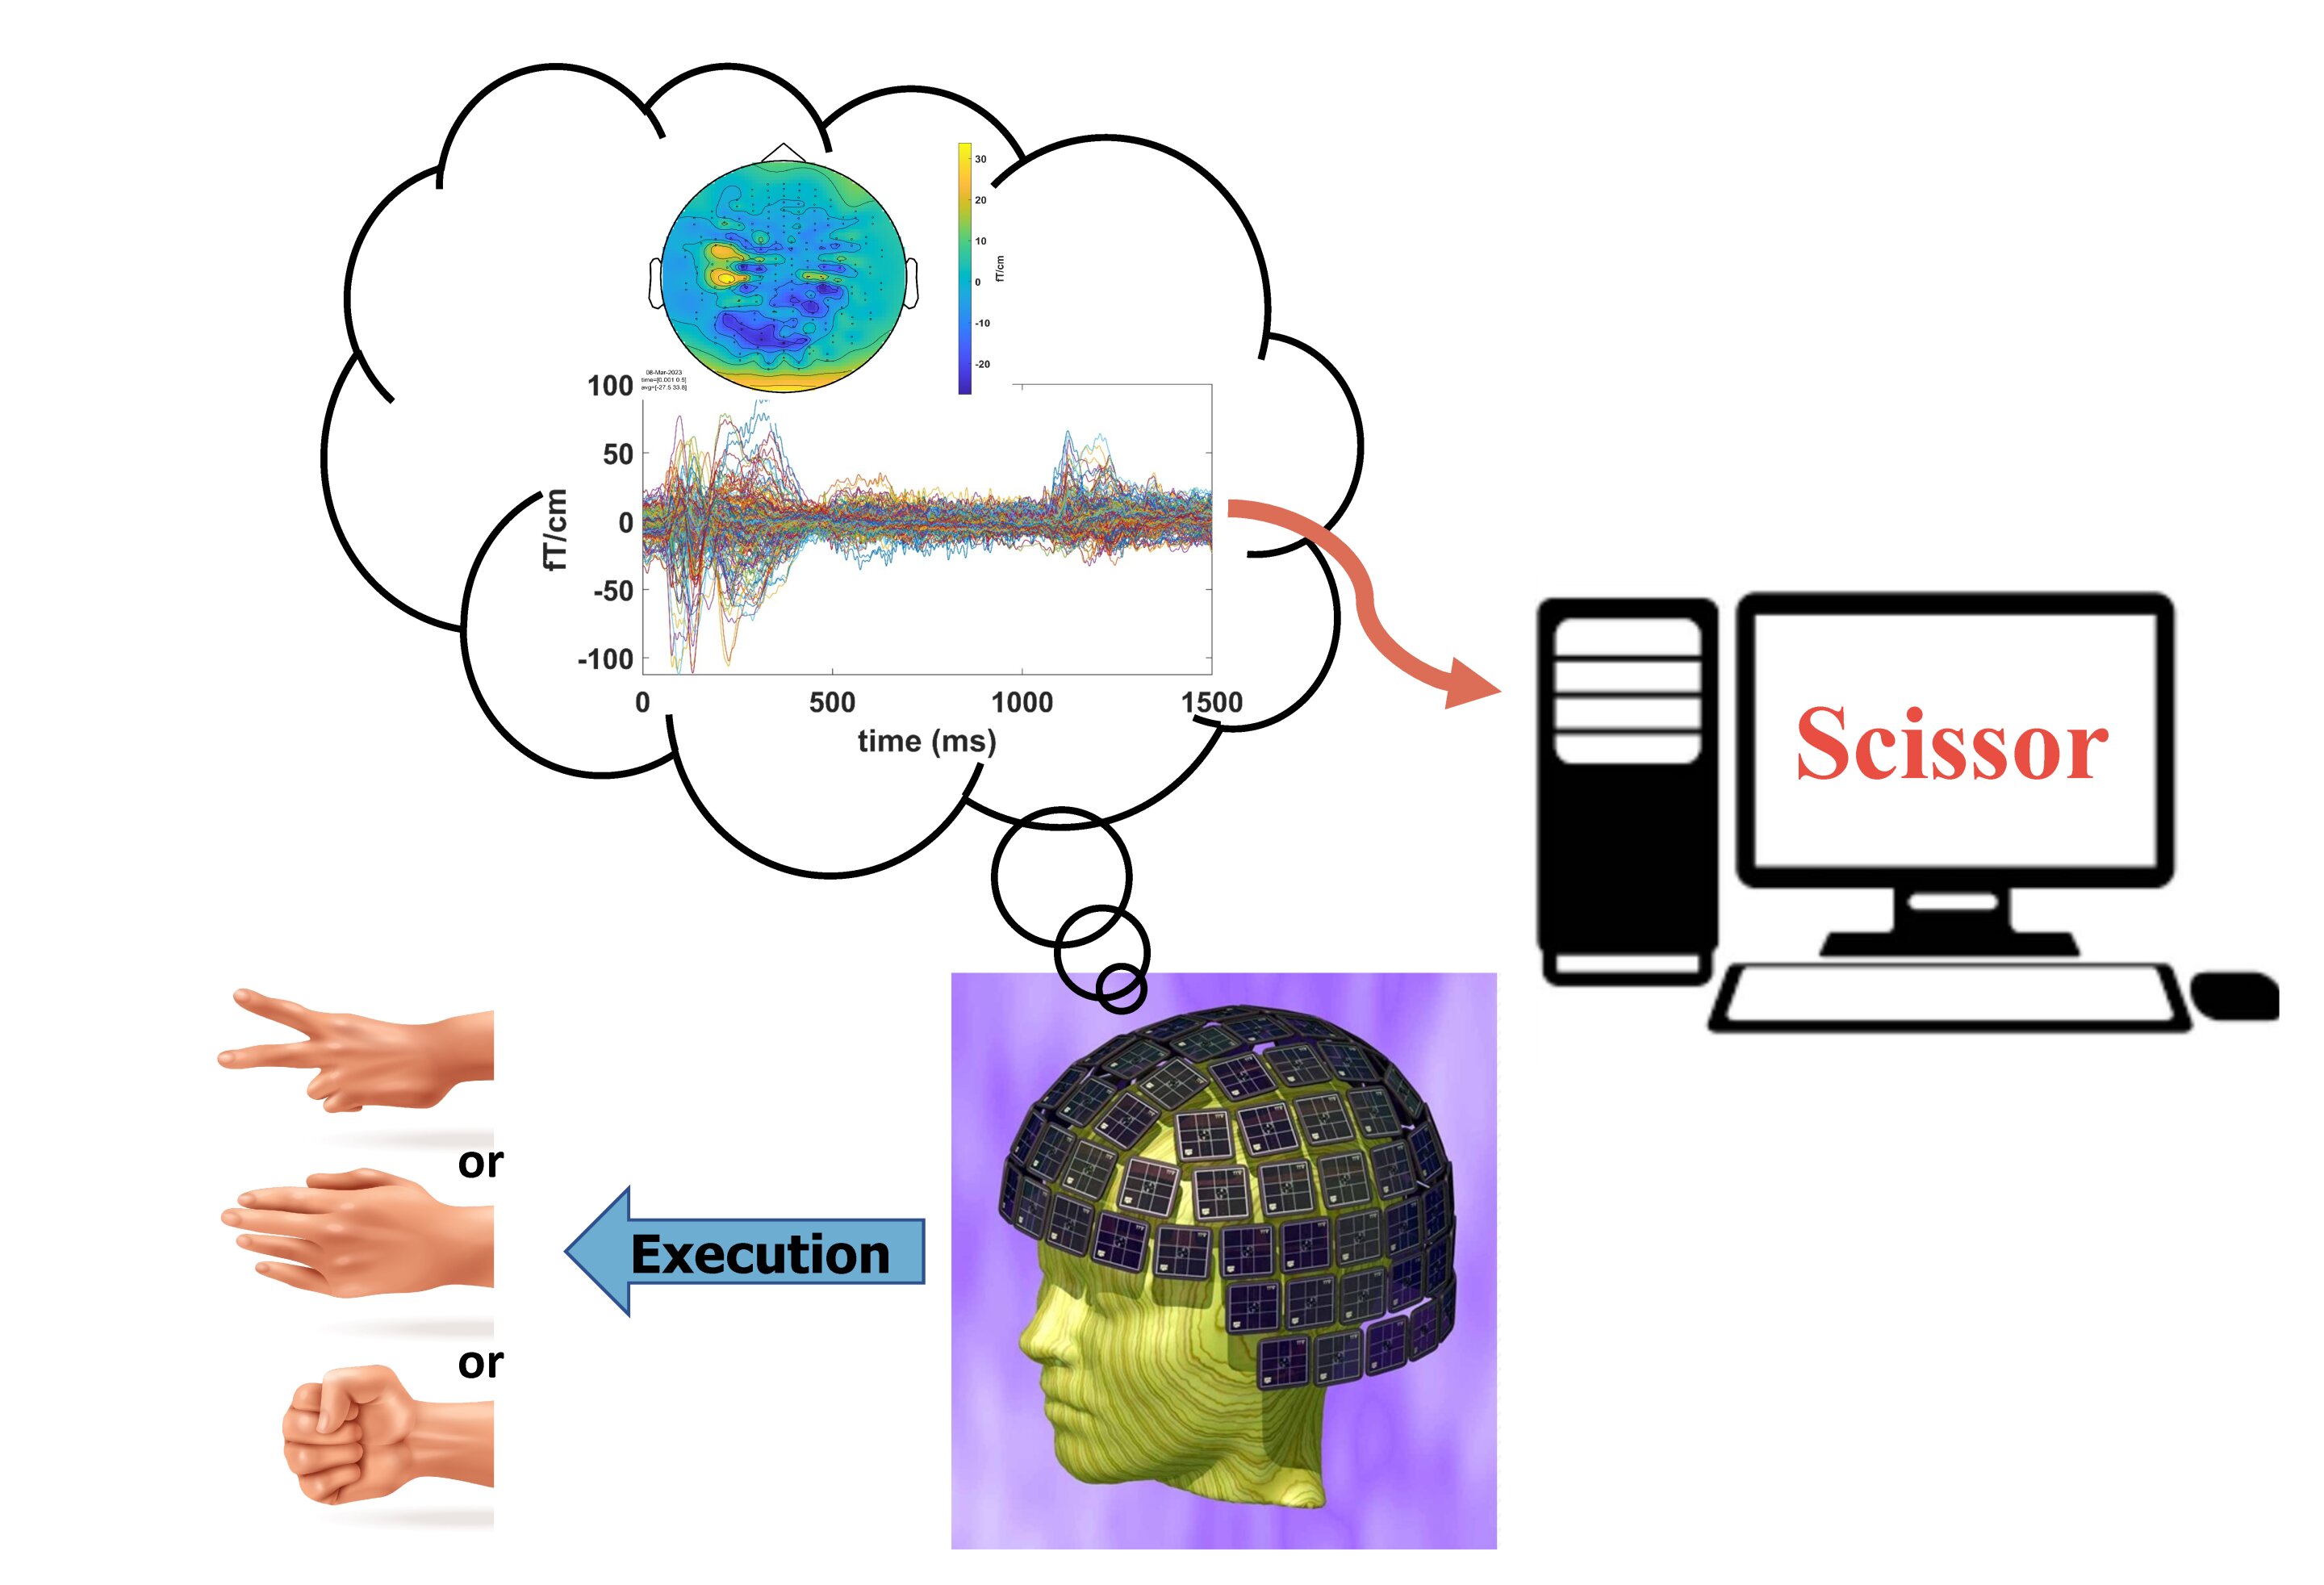 New study shows noninvasive brain imaging can distinguish among hand gestures